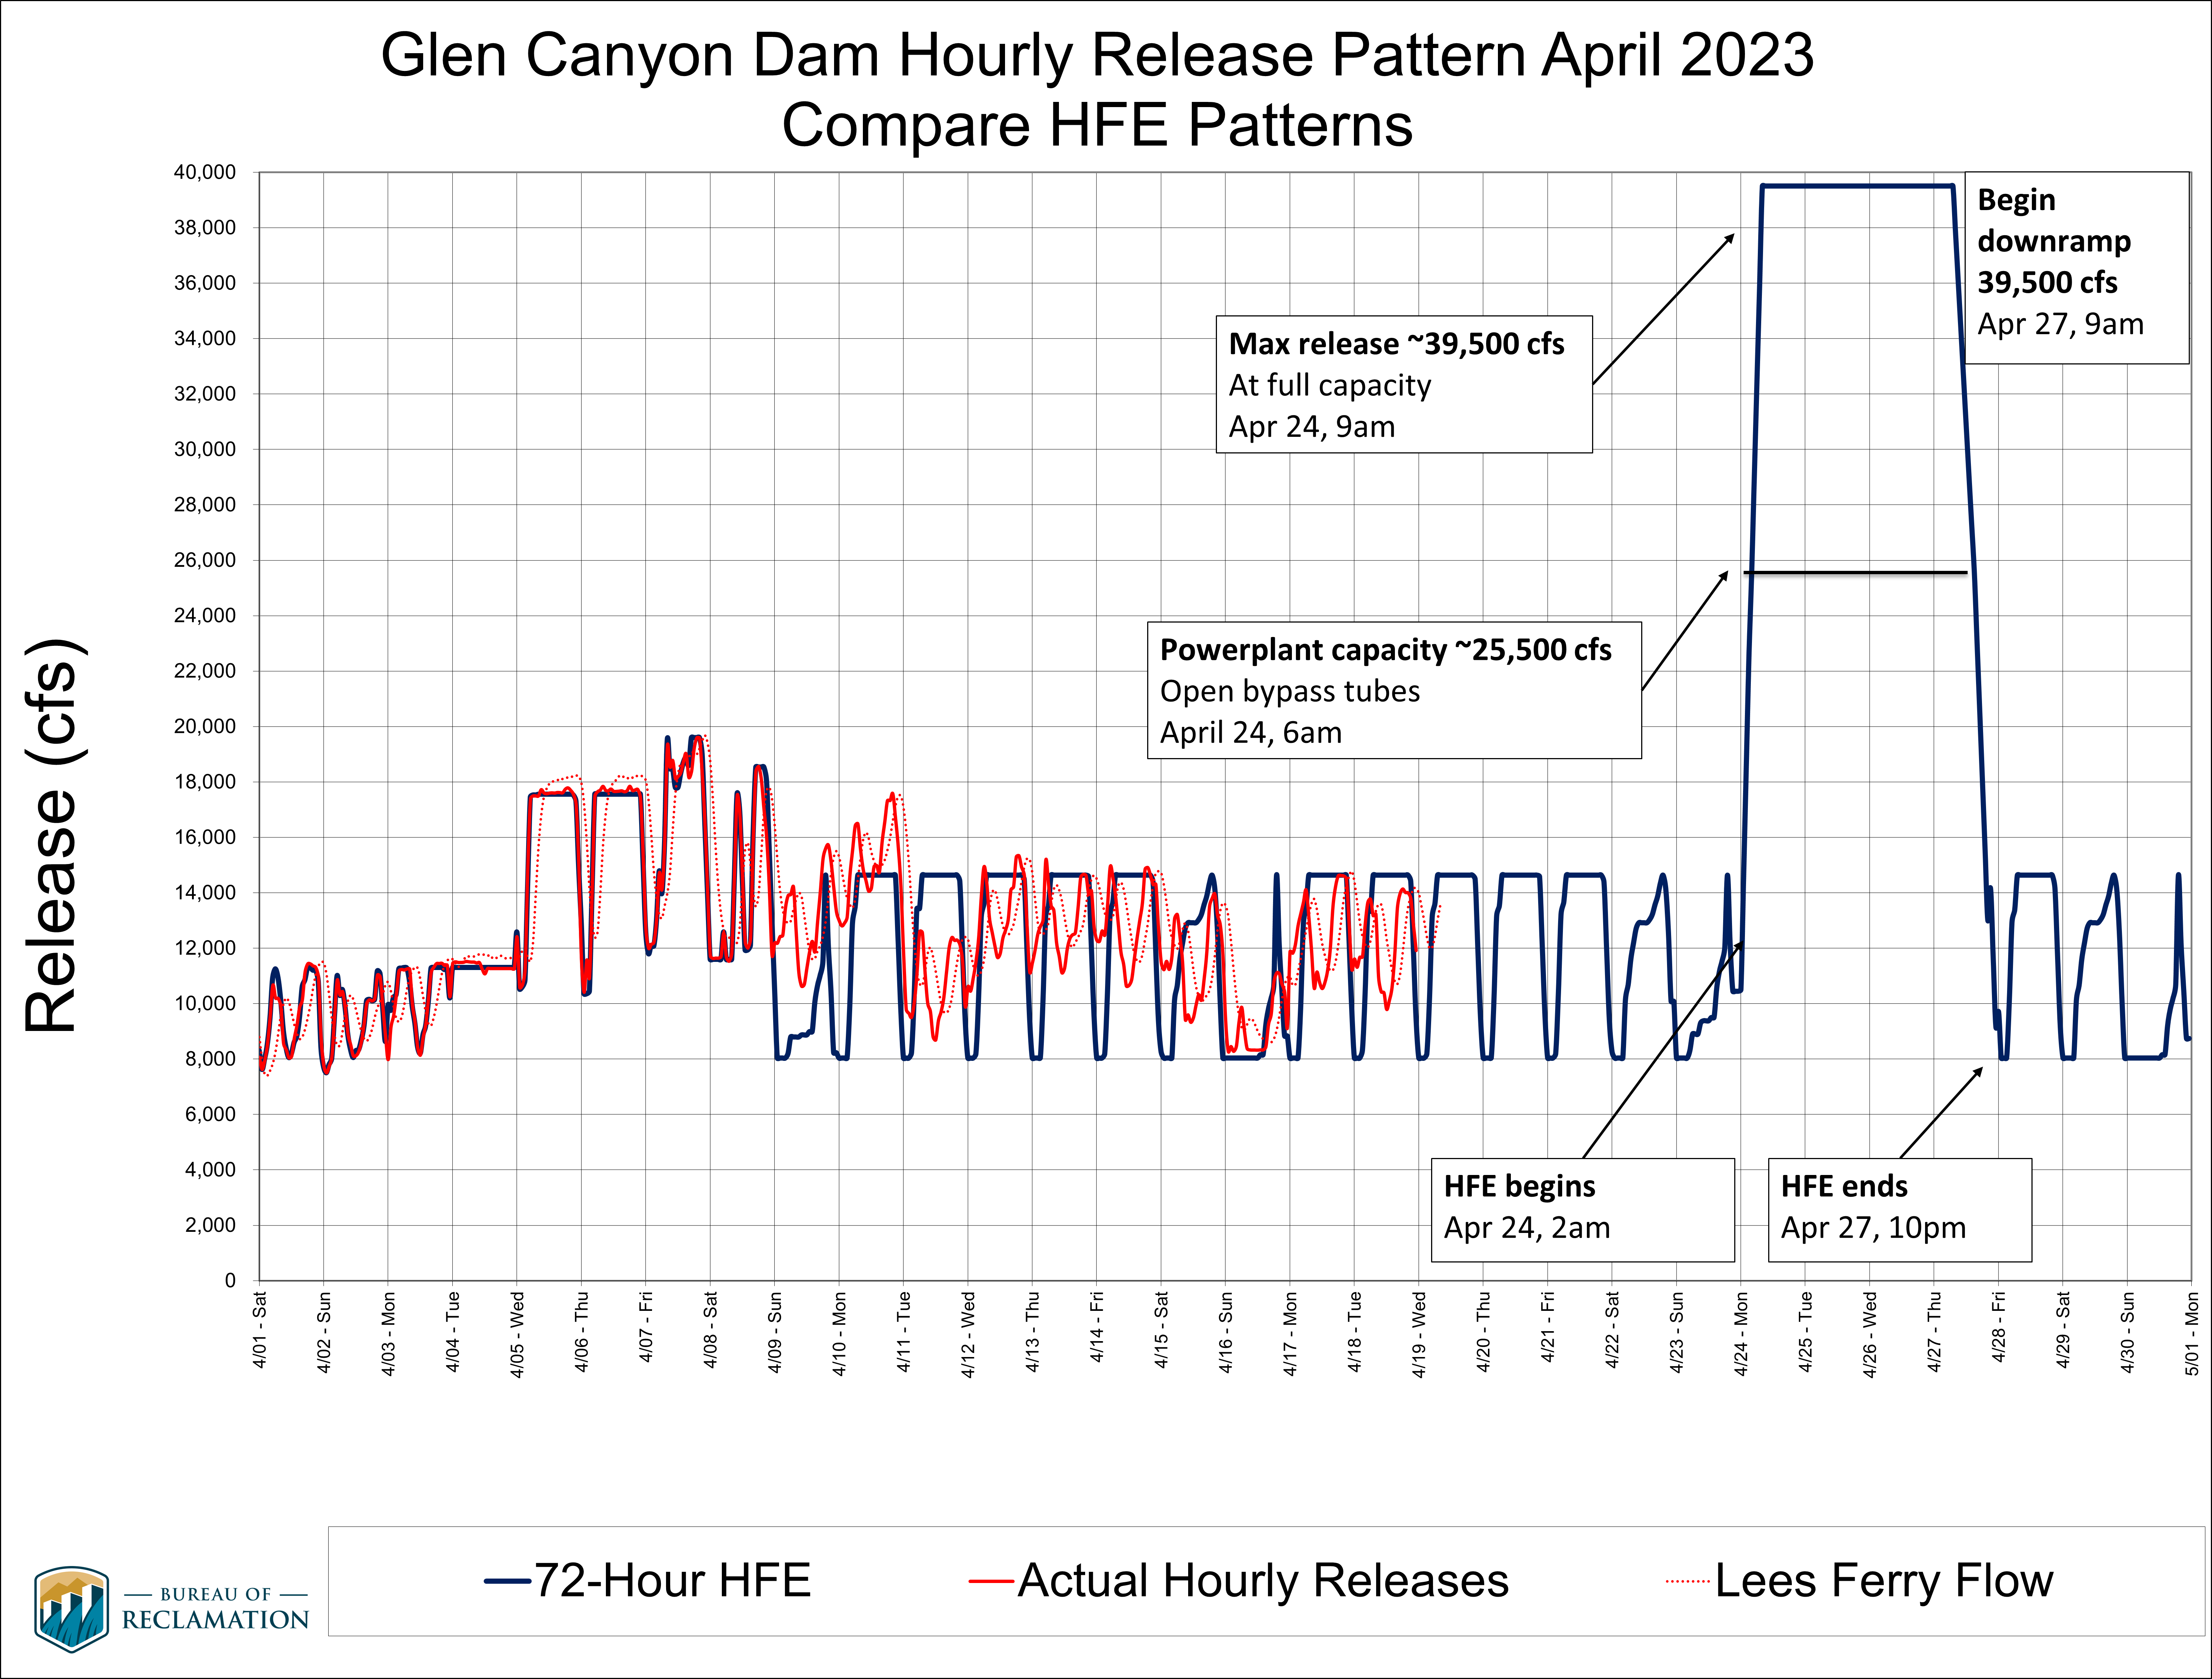 Glen Canyon Dam hourly release pattern for April 2023 HFE